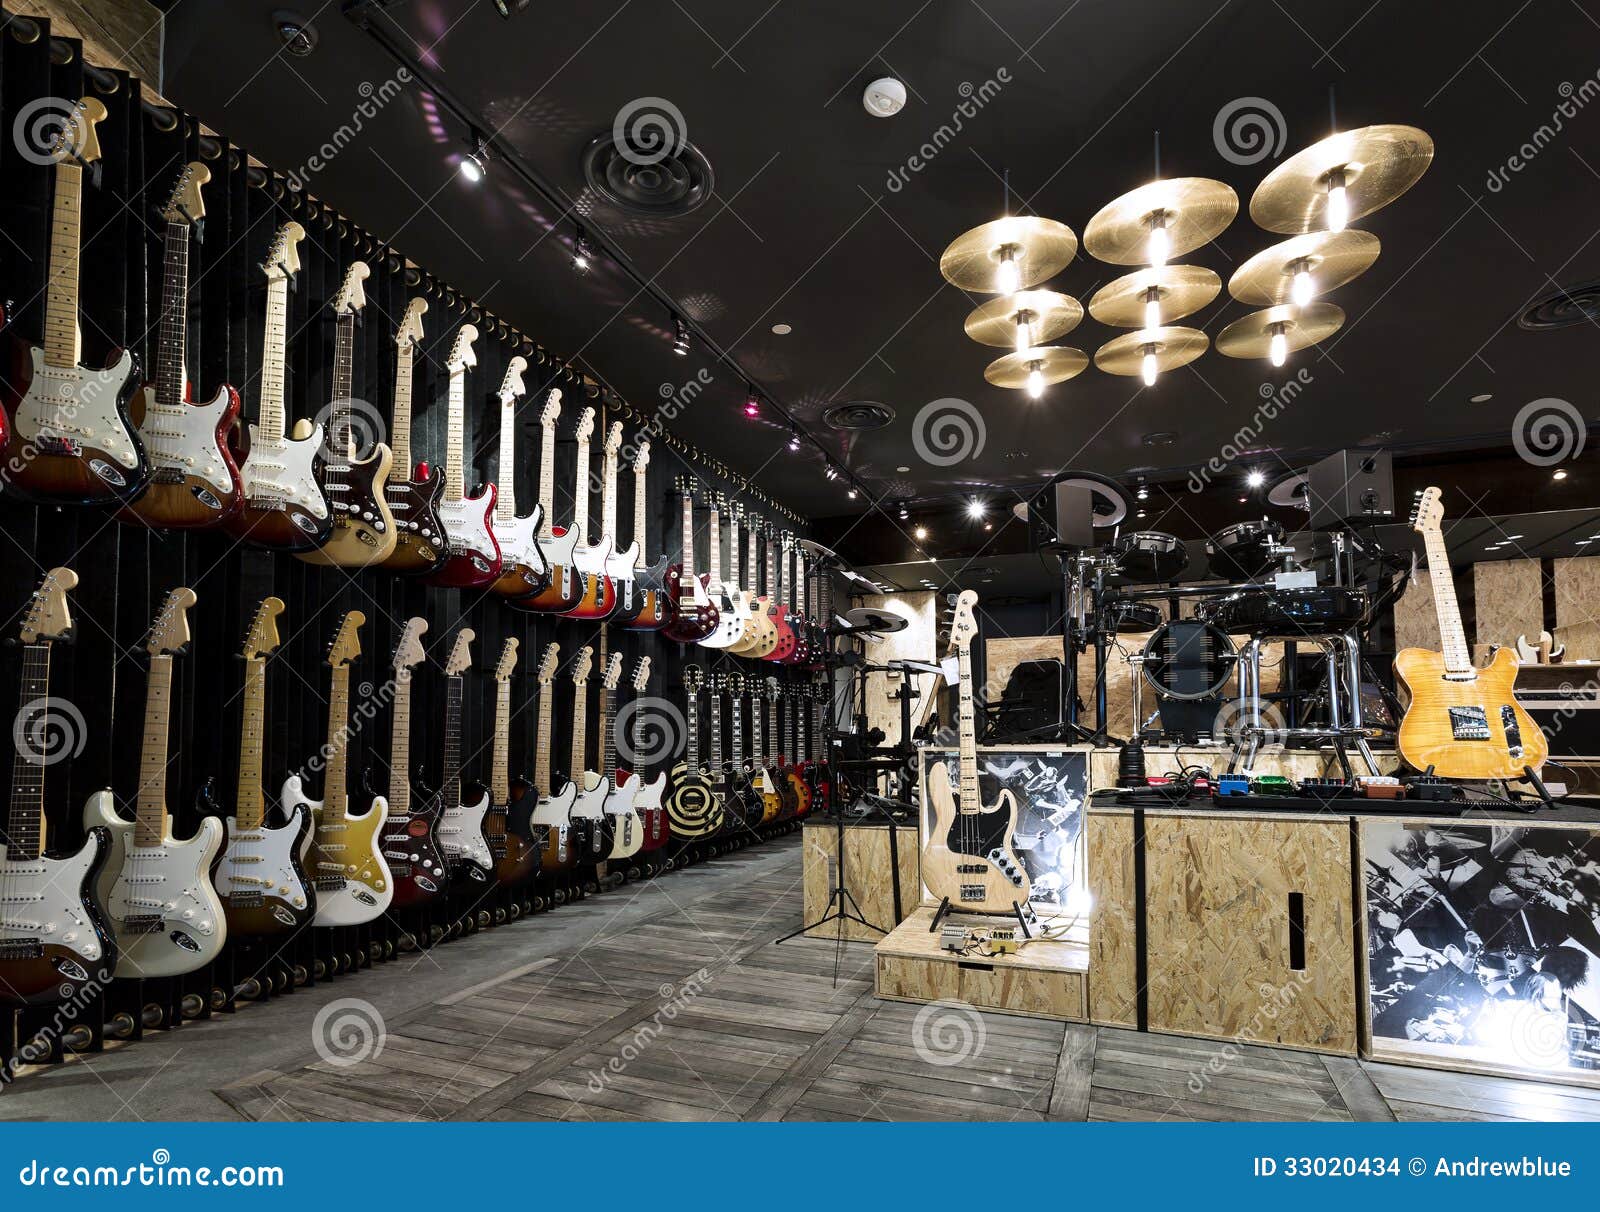 Musical Instrument Store Stock Images - Image: 33020434